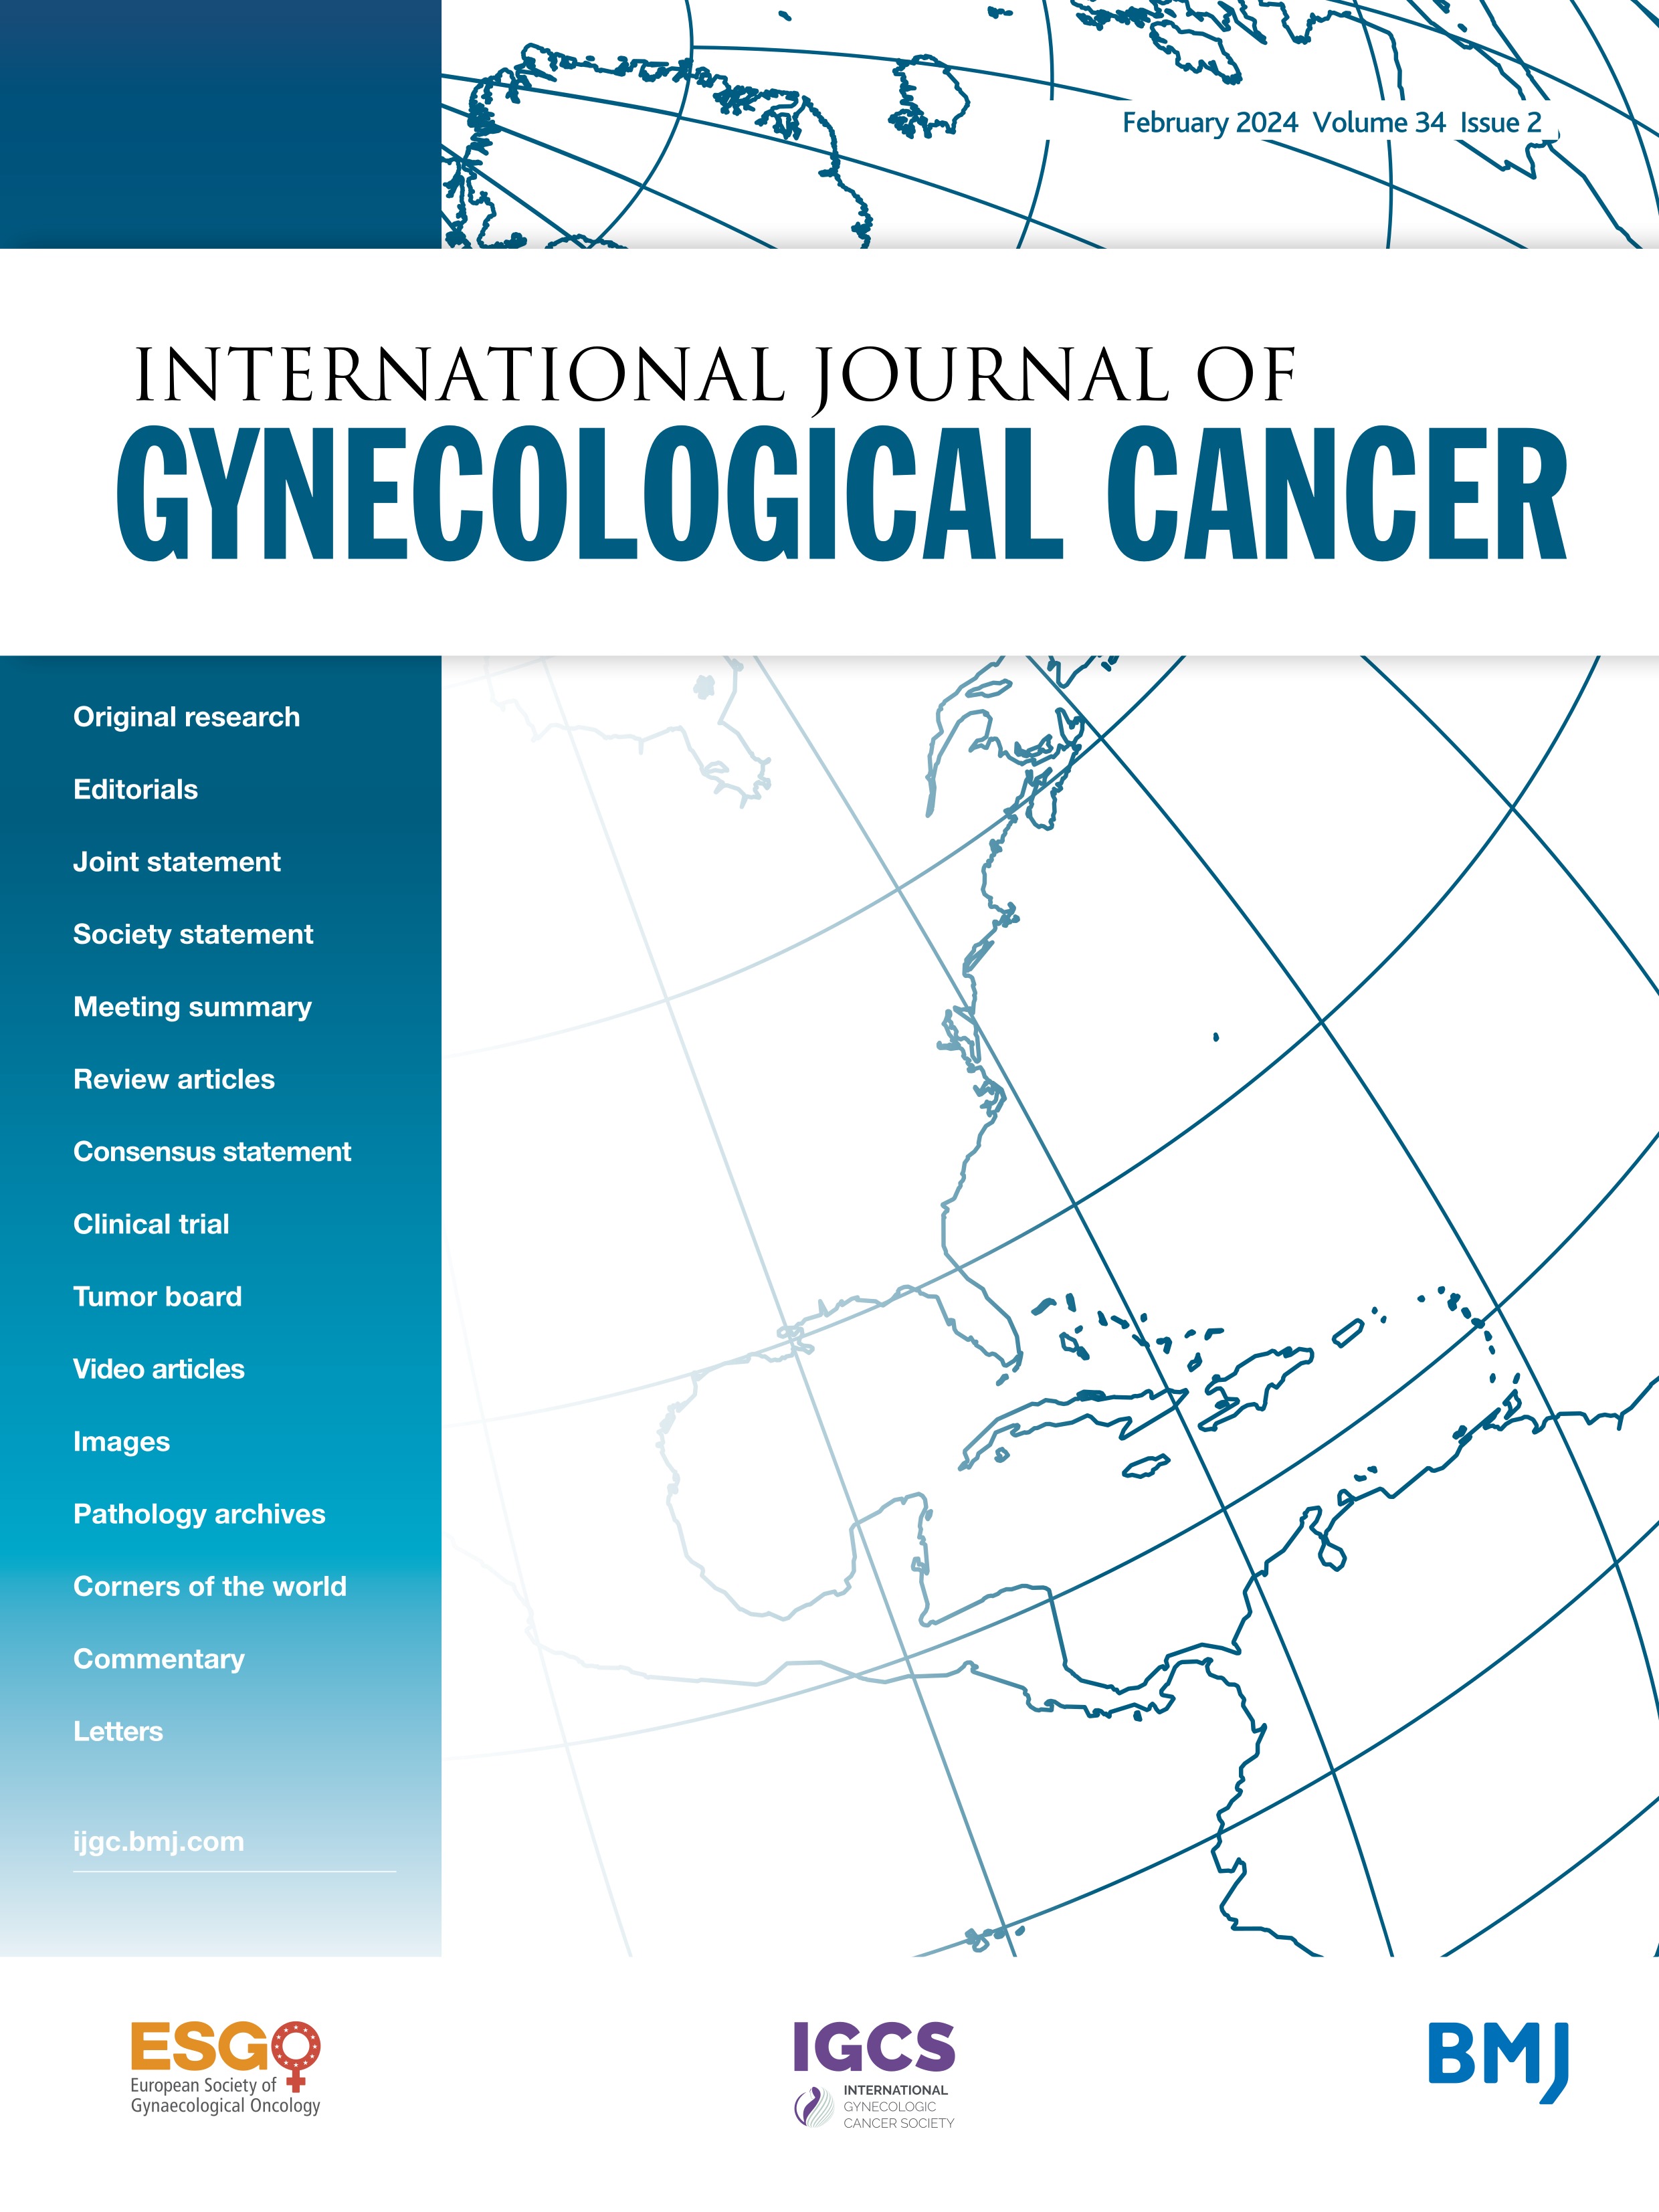 Impact of pelvic radiation therapy in patients with early neuroendocrine cervical carcinoma and no residual disease in the radical hysterectomy specimen: a NeCTuR study